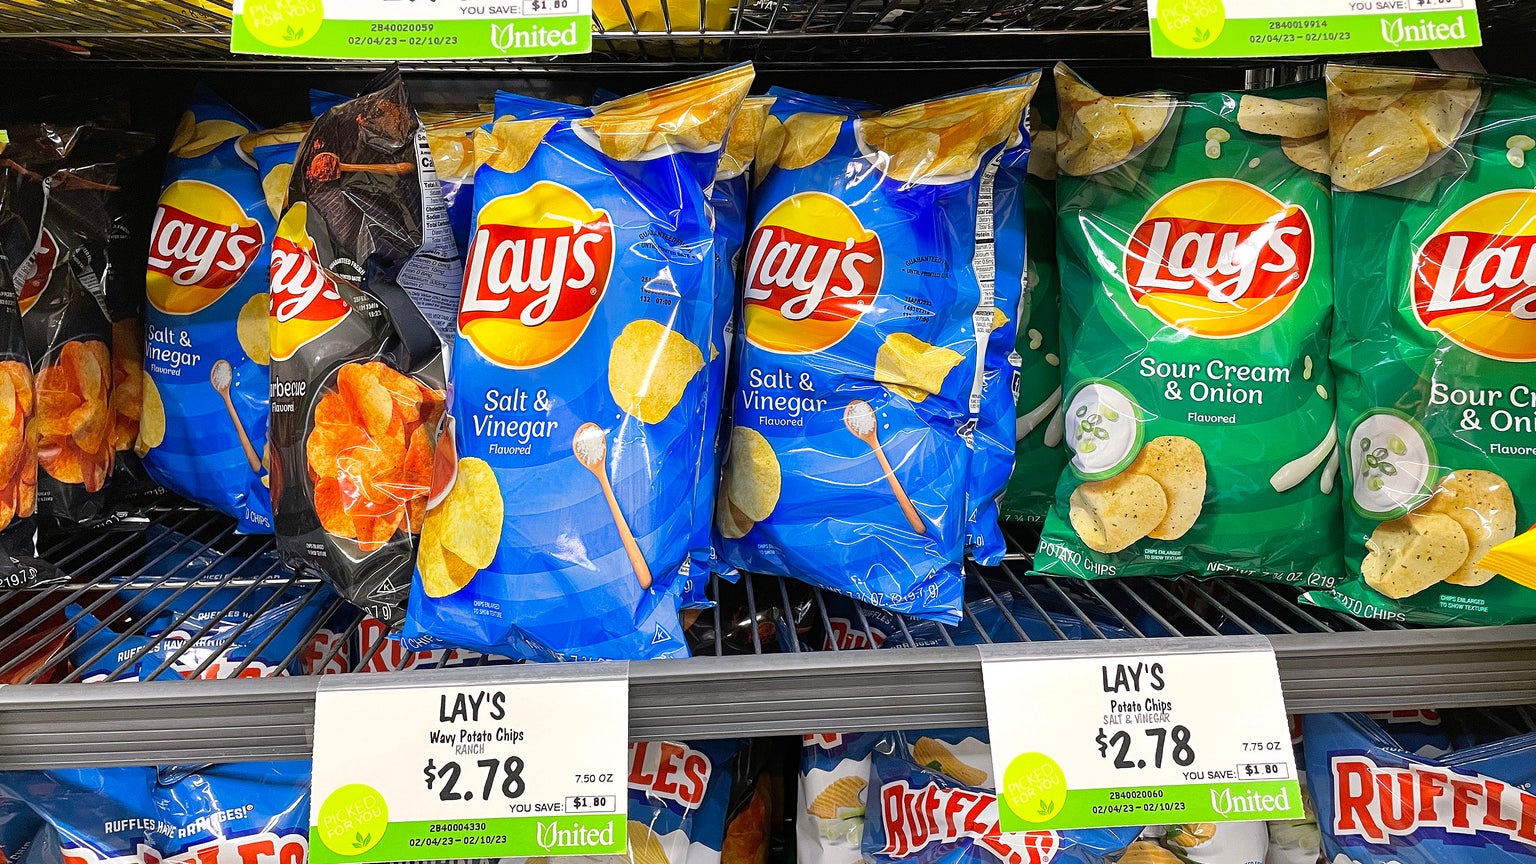 Smarter Choices in the Potato Chip Aisle - Canadian Food Focus